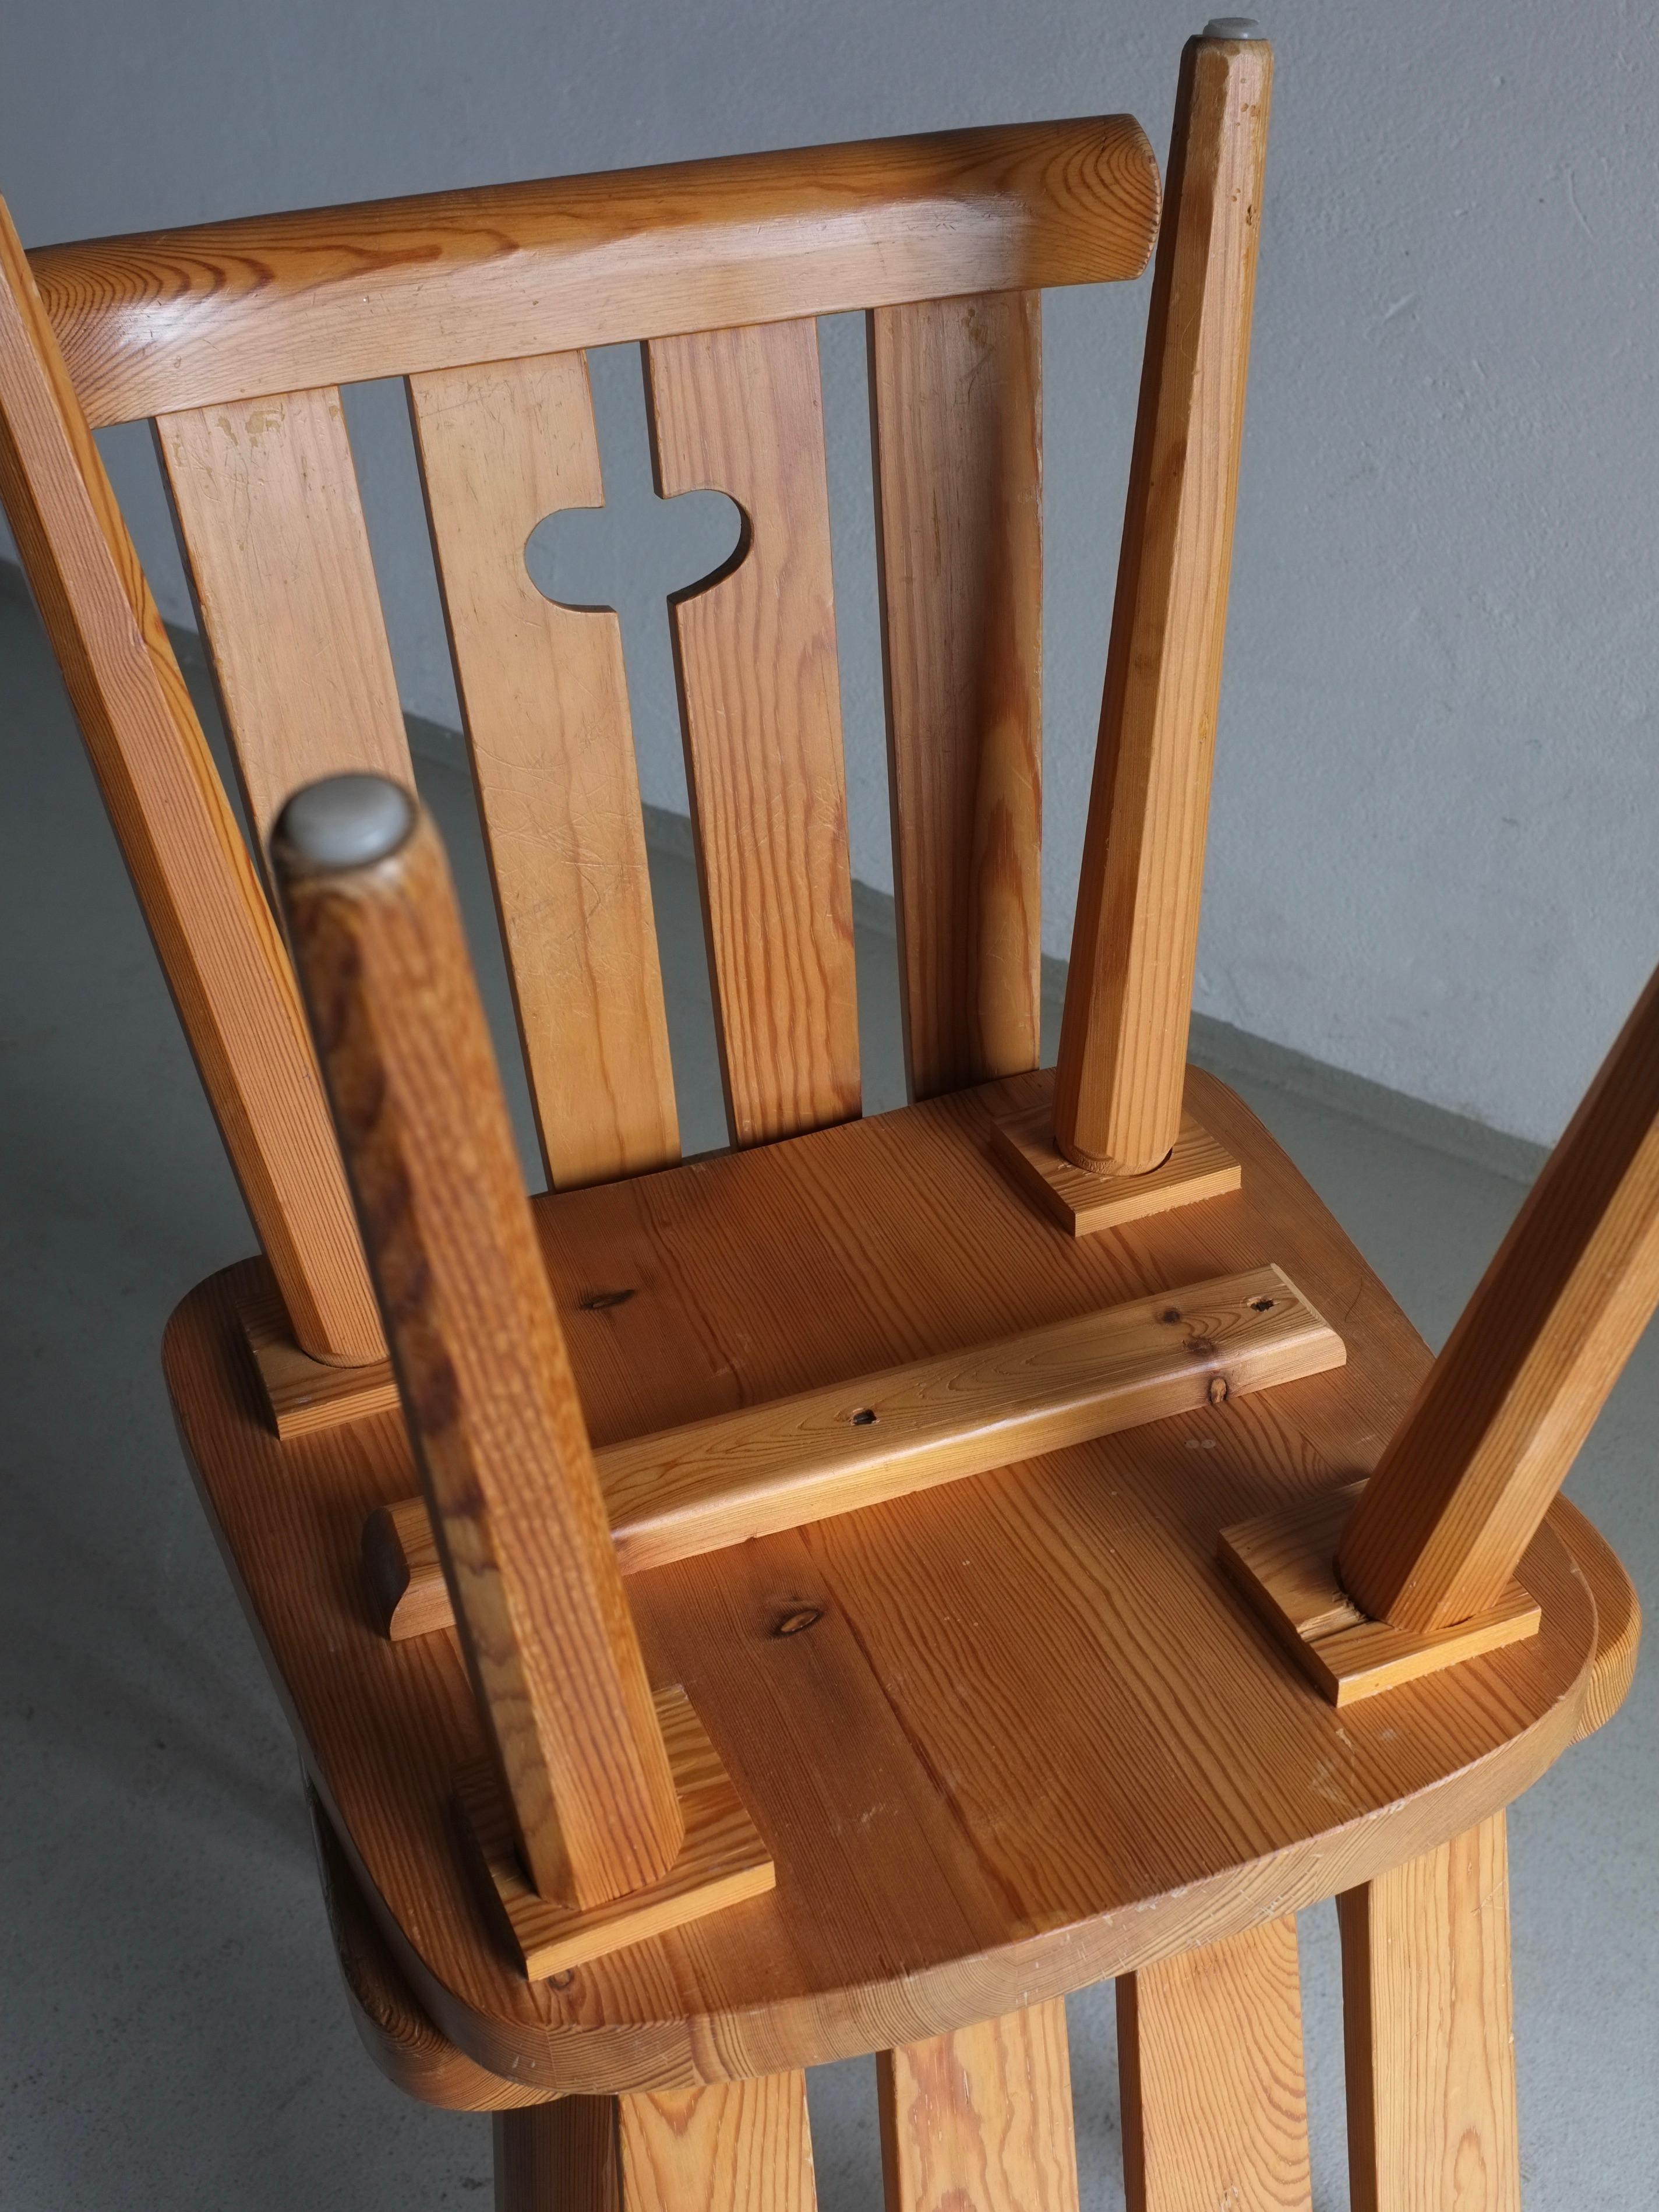 Set of 2 Solid Pine Chairs, Göran Malmvall, Sweden 1940s For Sale 1